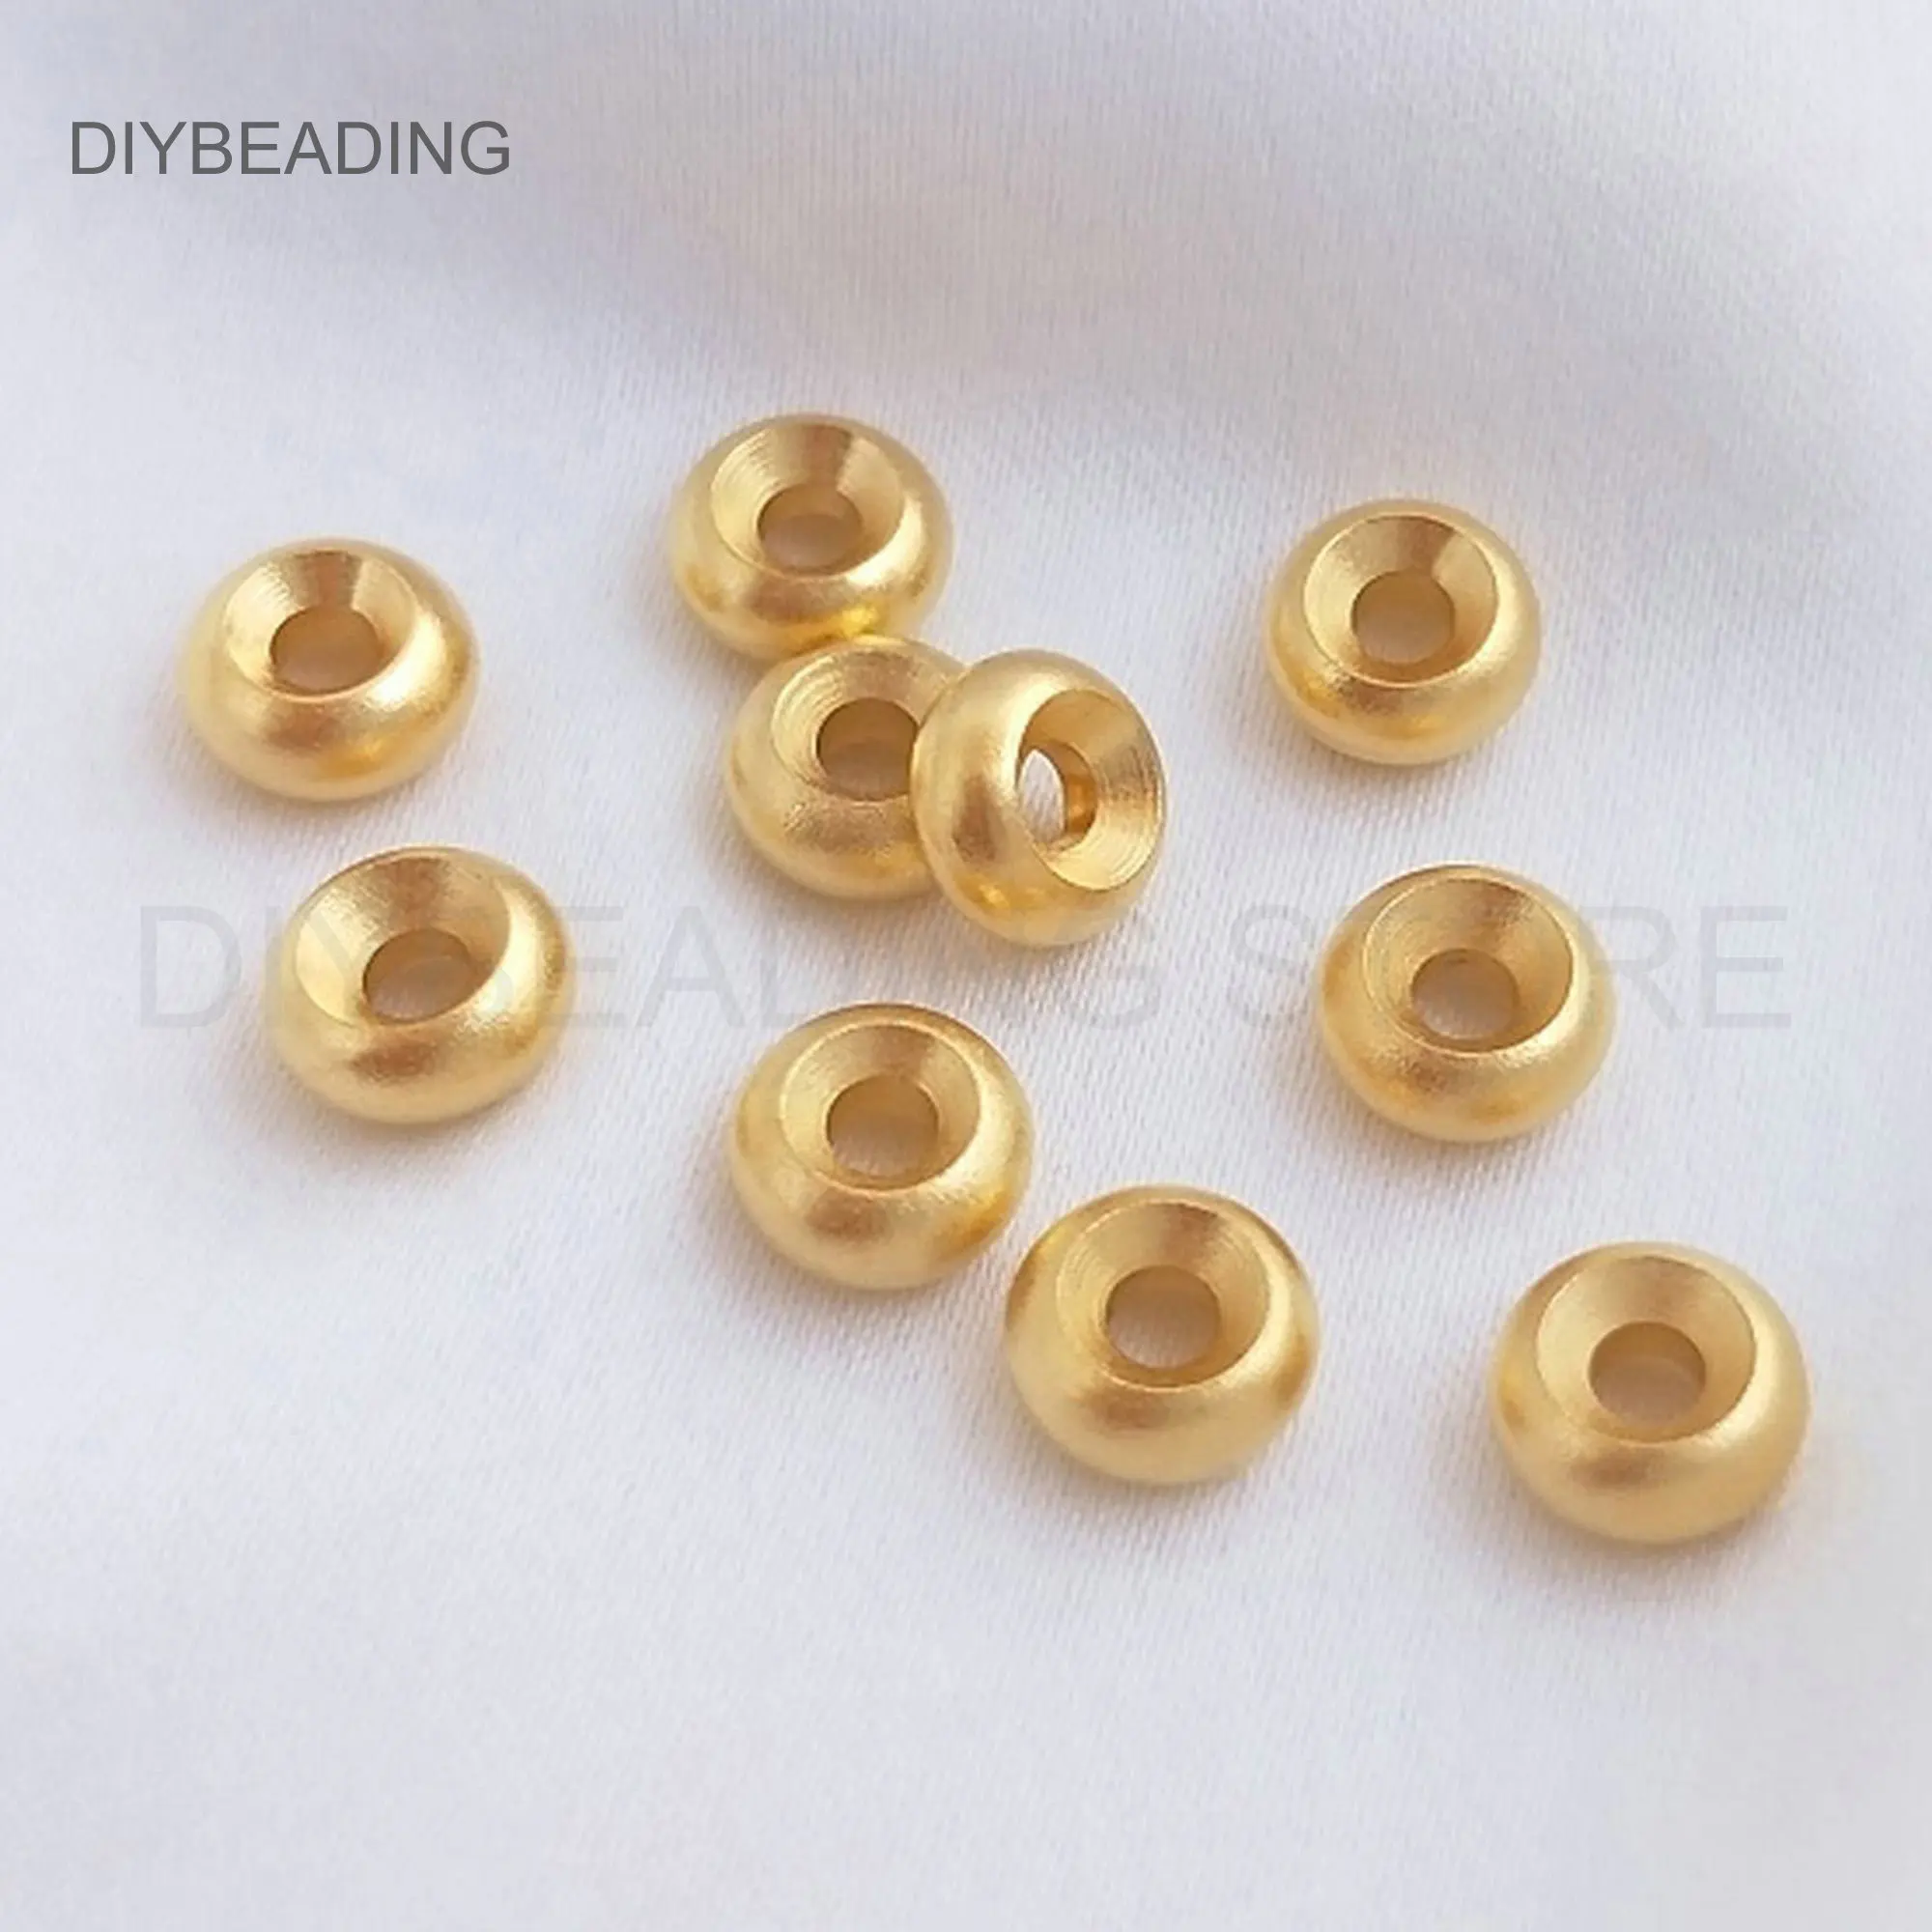 

6mm Gold Jewelry Making Beads Lots Supplies 14K Real Gold Plated Brass Smooth Plain Small Size Spacer Bead Online Bulk Wholesale